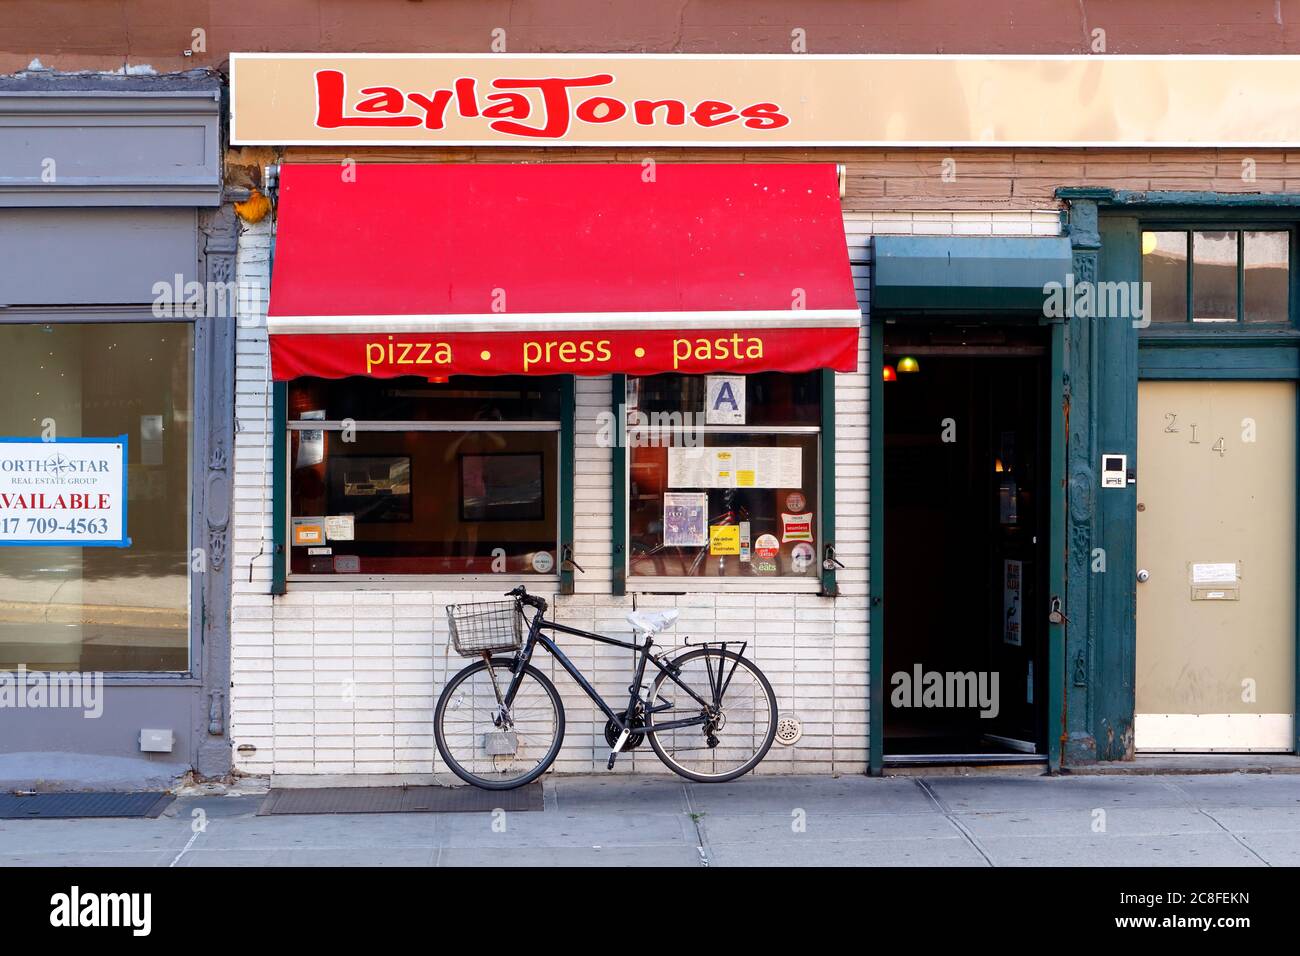 Layla Jones, 214 Court St, Brooklyn, New York, NYC storefront photo of a pizza shop in the Carroll Gardens neighborhood. Stock Photo